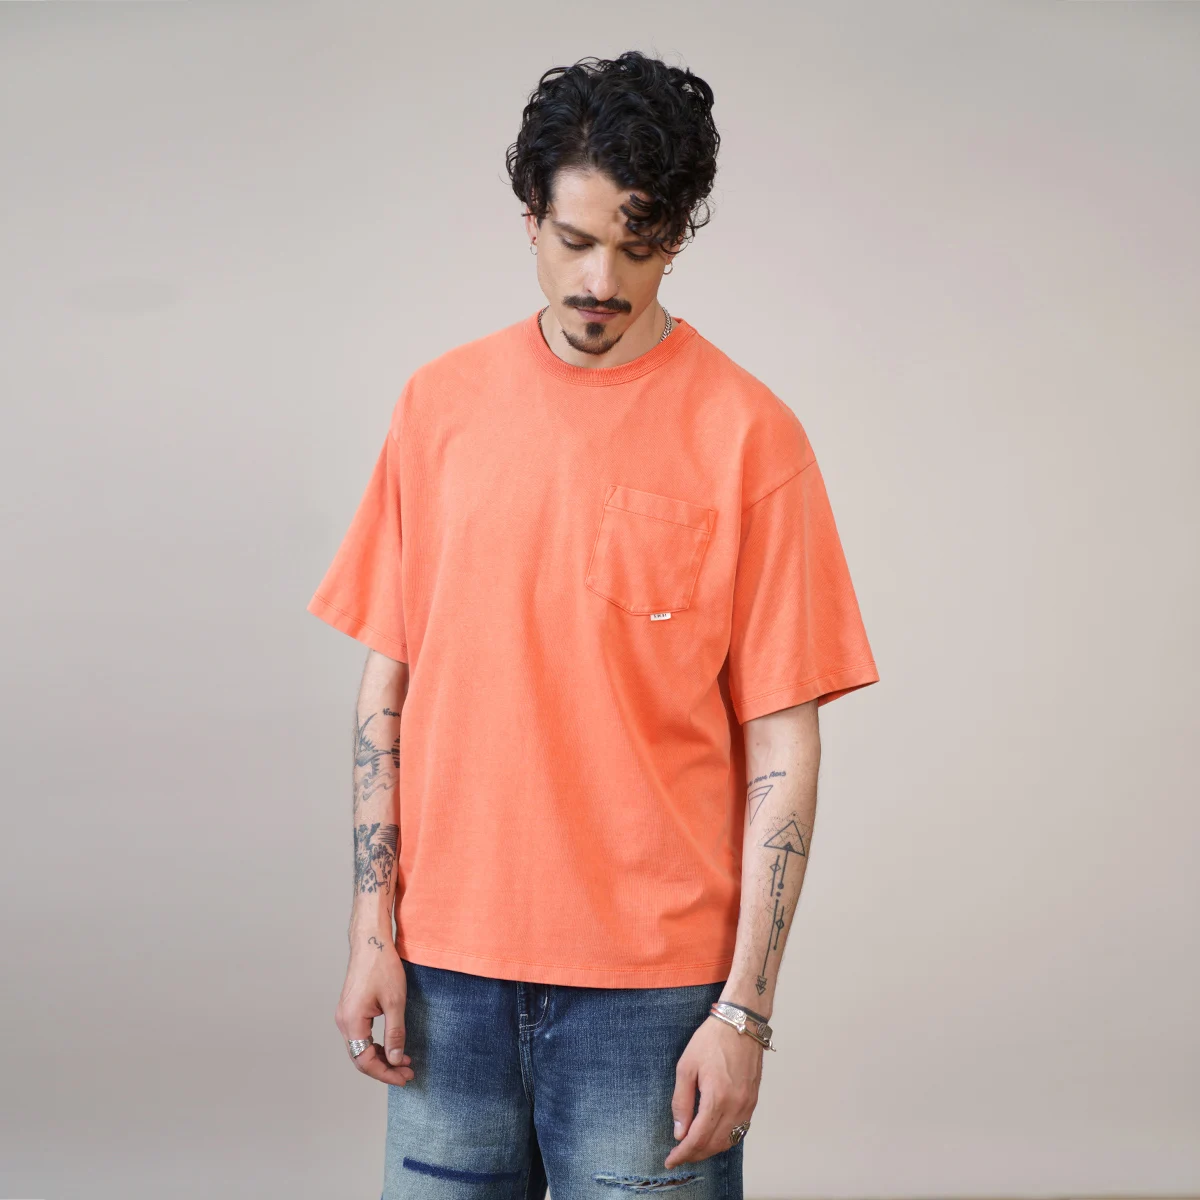 SIMWOOD  2022 Summer New Oversize Heavyweight Vintage T-shirts Men Workwear Hip Hop Loose 100% Cotton Tops Brand Clothing